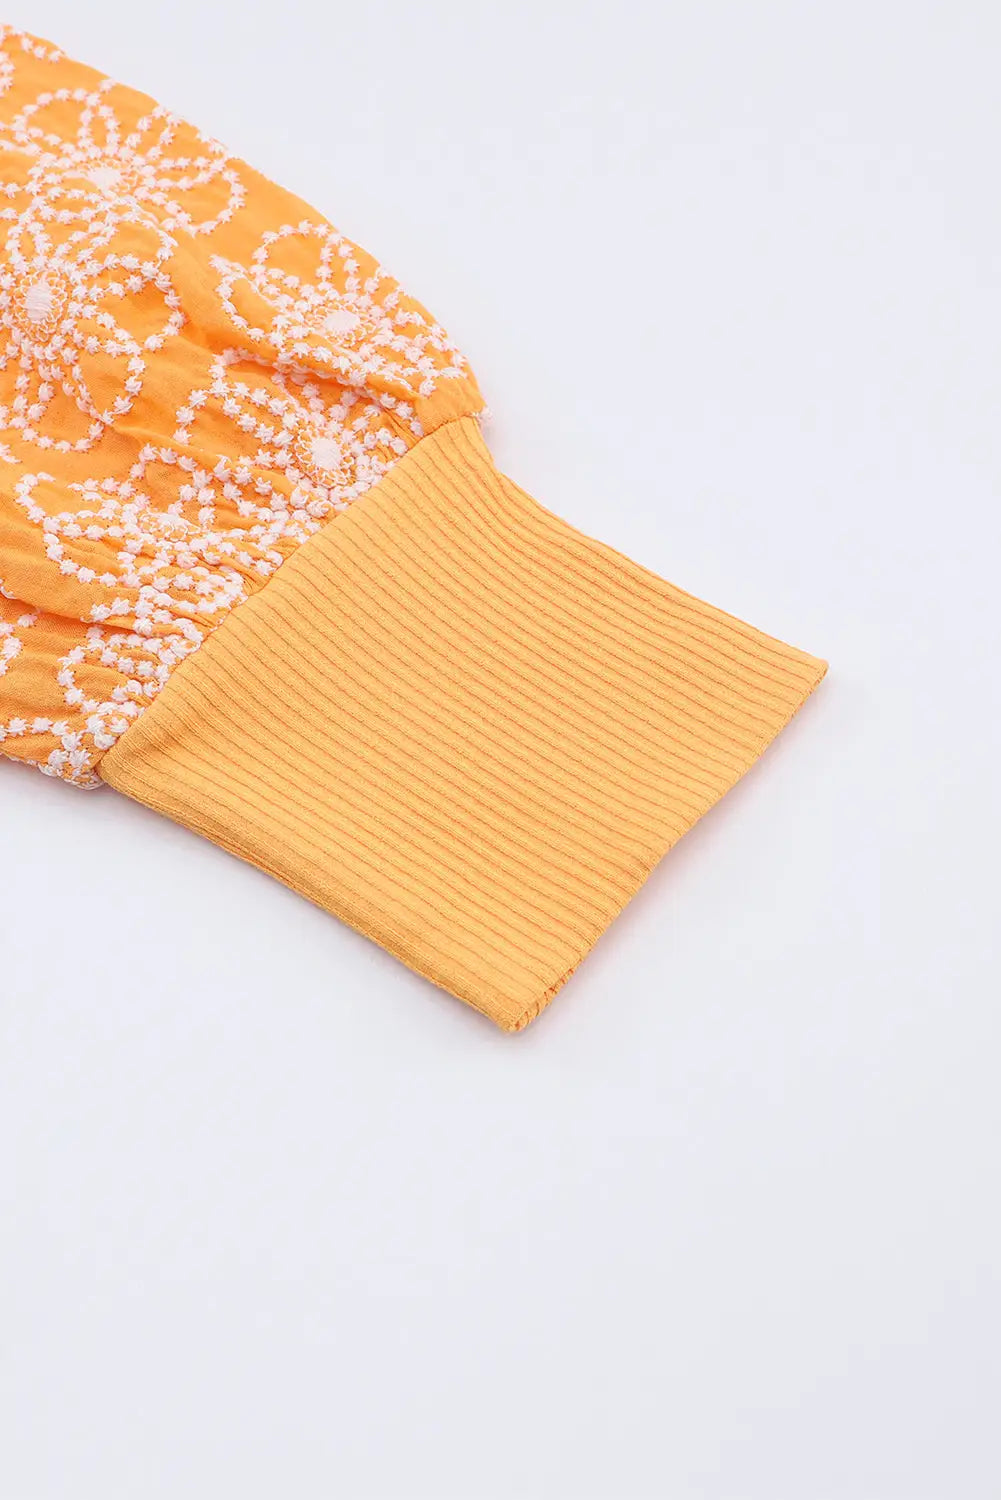 Yellow flower puff sleeve ribbed knit top - tops